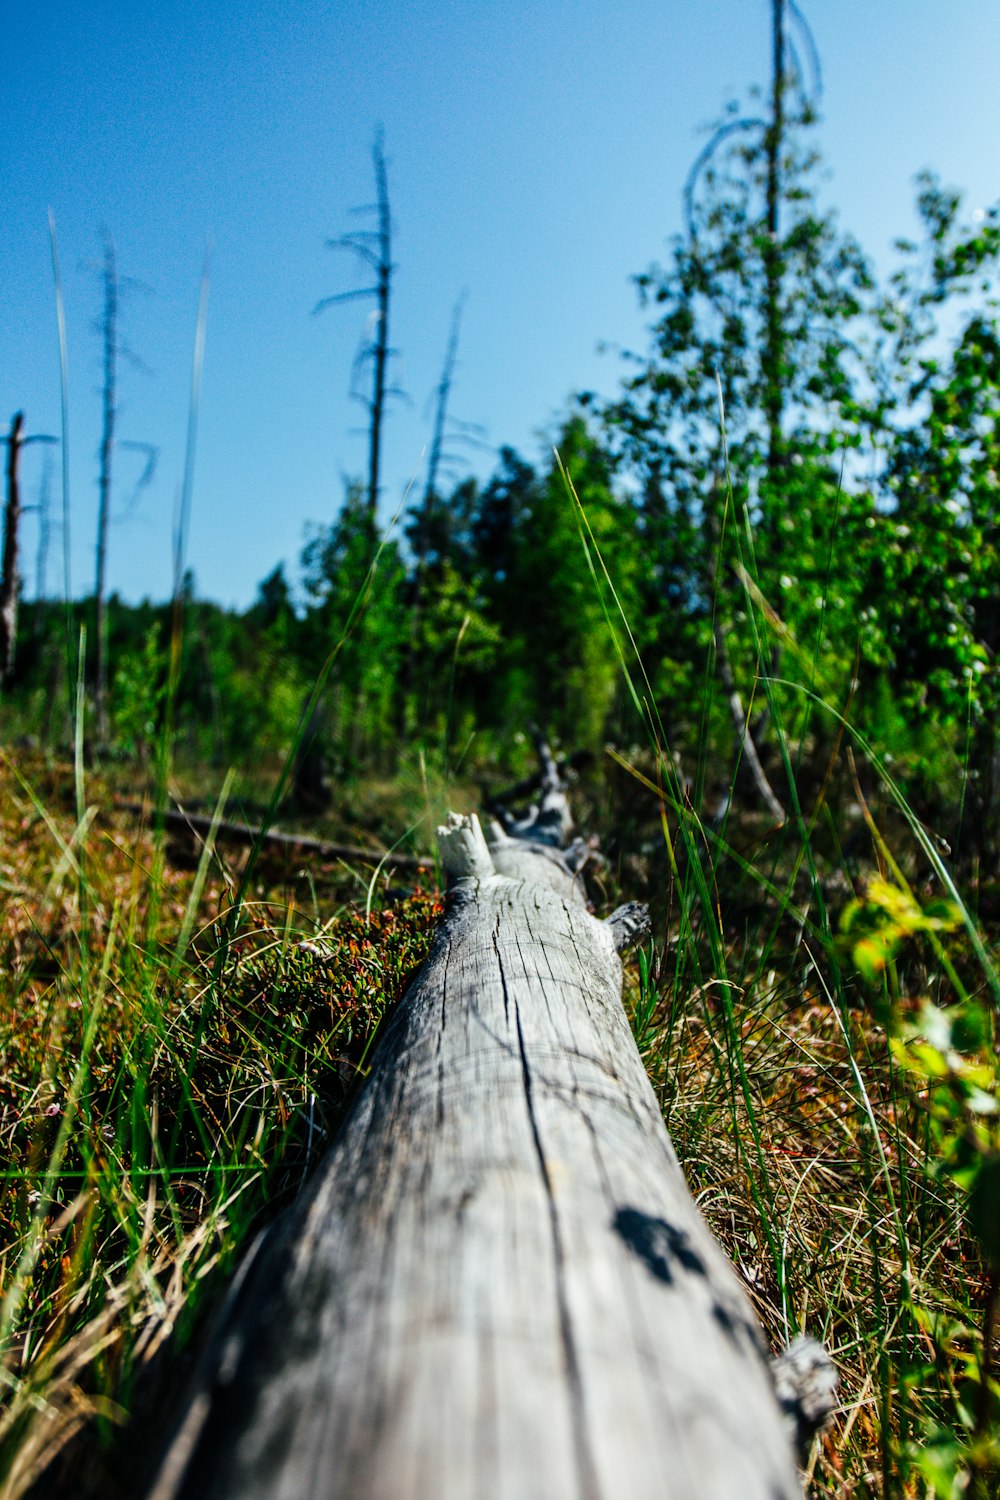 a close up of a log in the grass